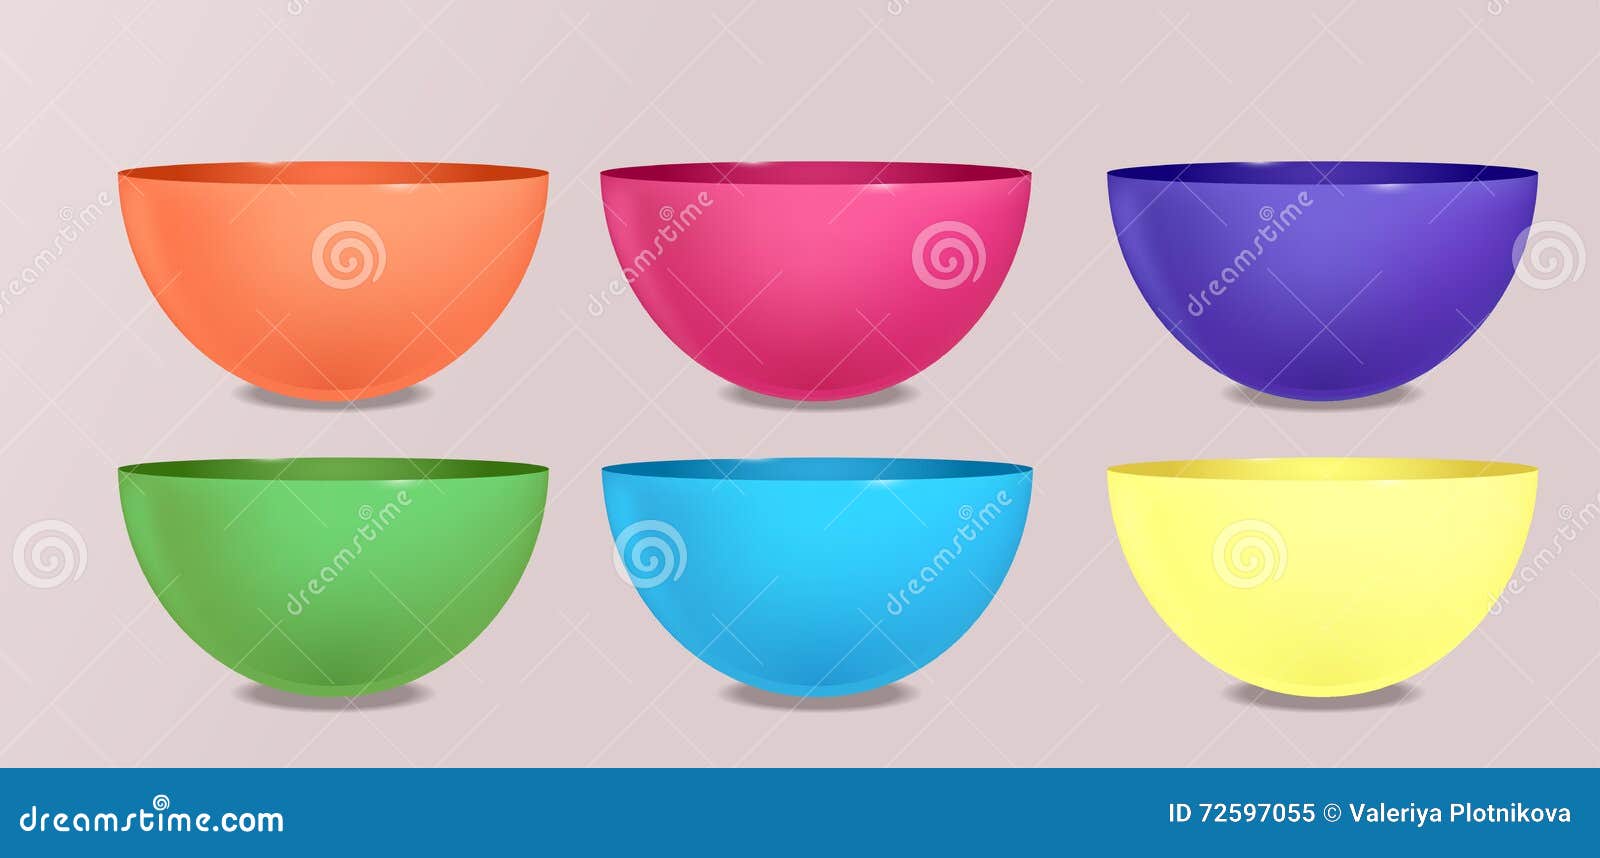 set of colorful bowls and cups.